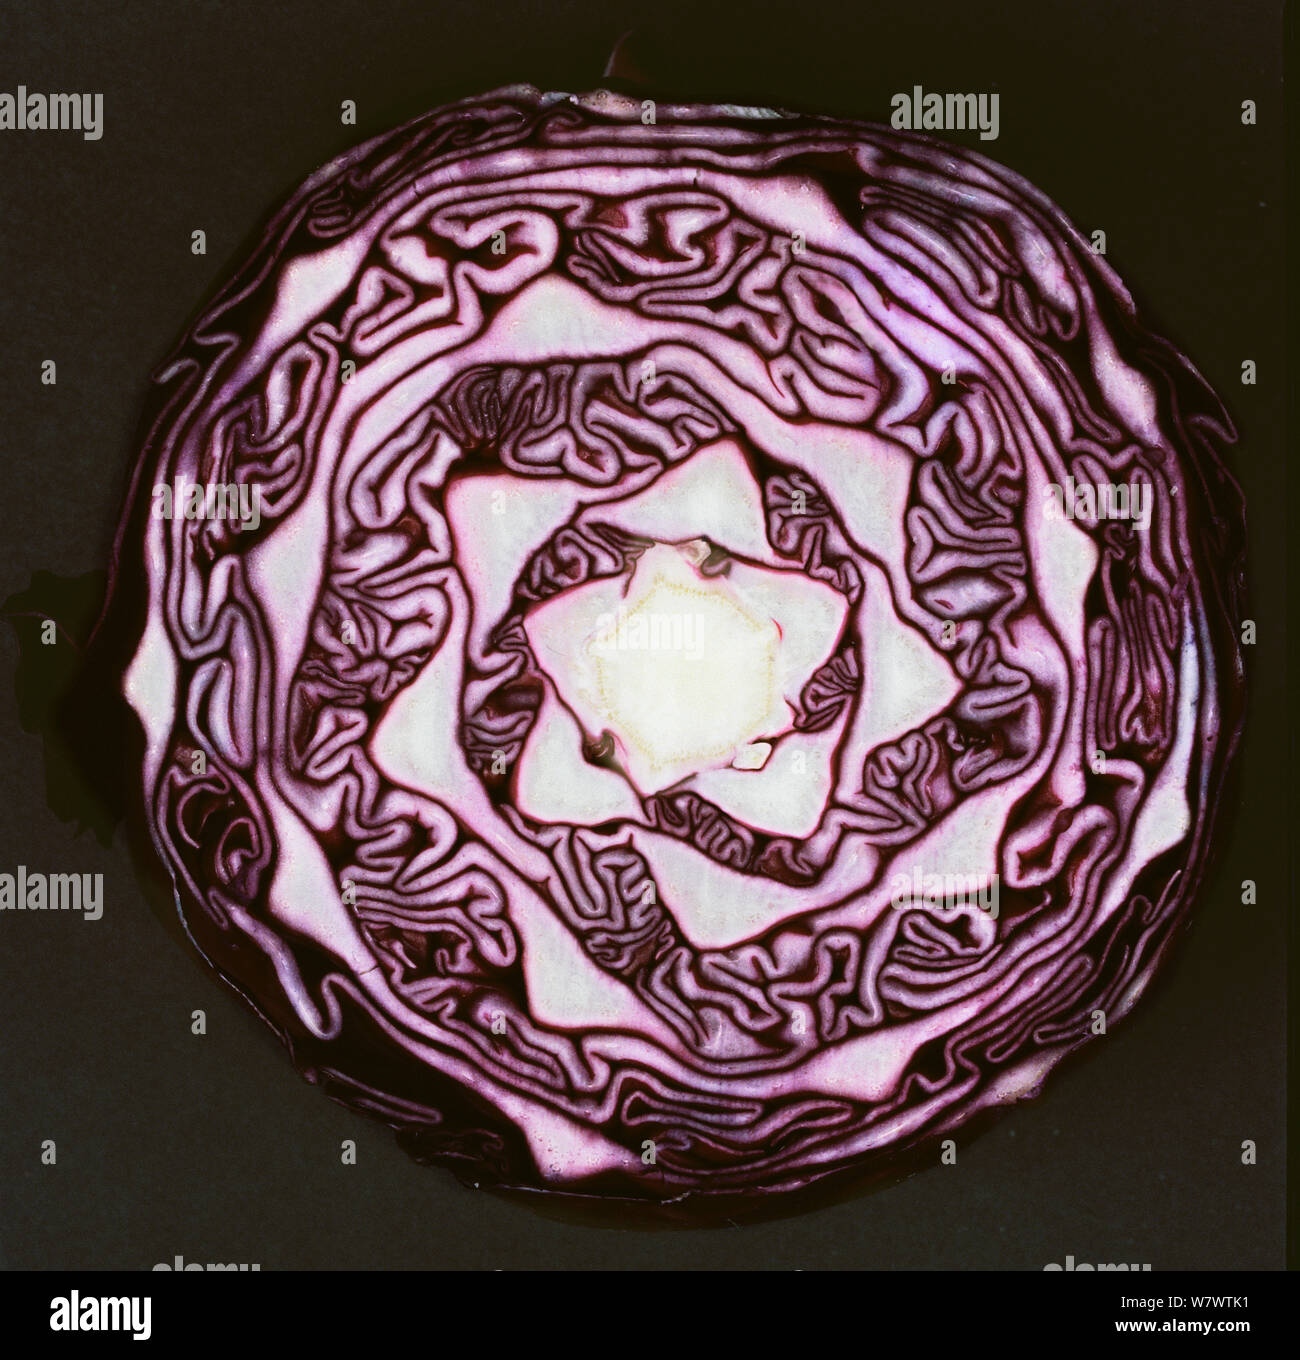 Red cabbage (Brassica oleracea var. capitata f. rubra) cross section showing leaf spiral. Stock Photo